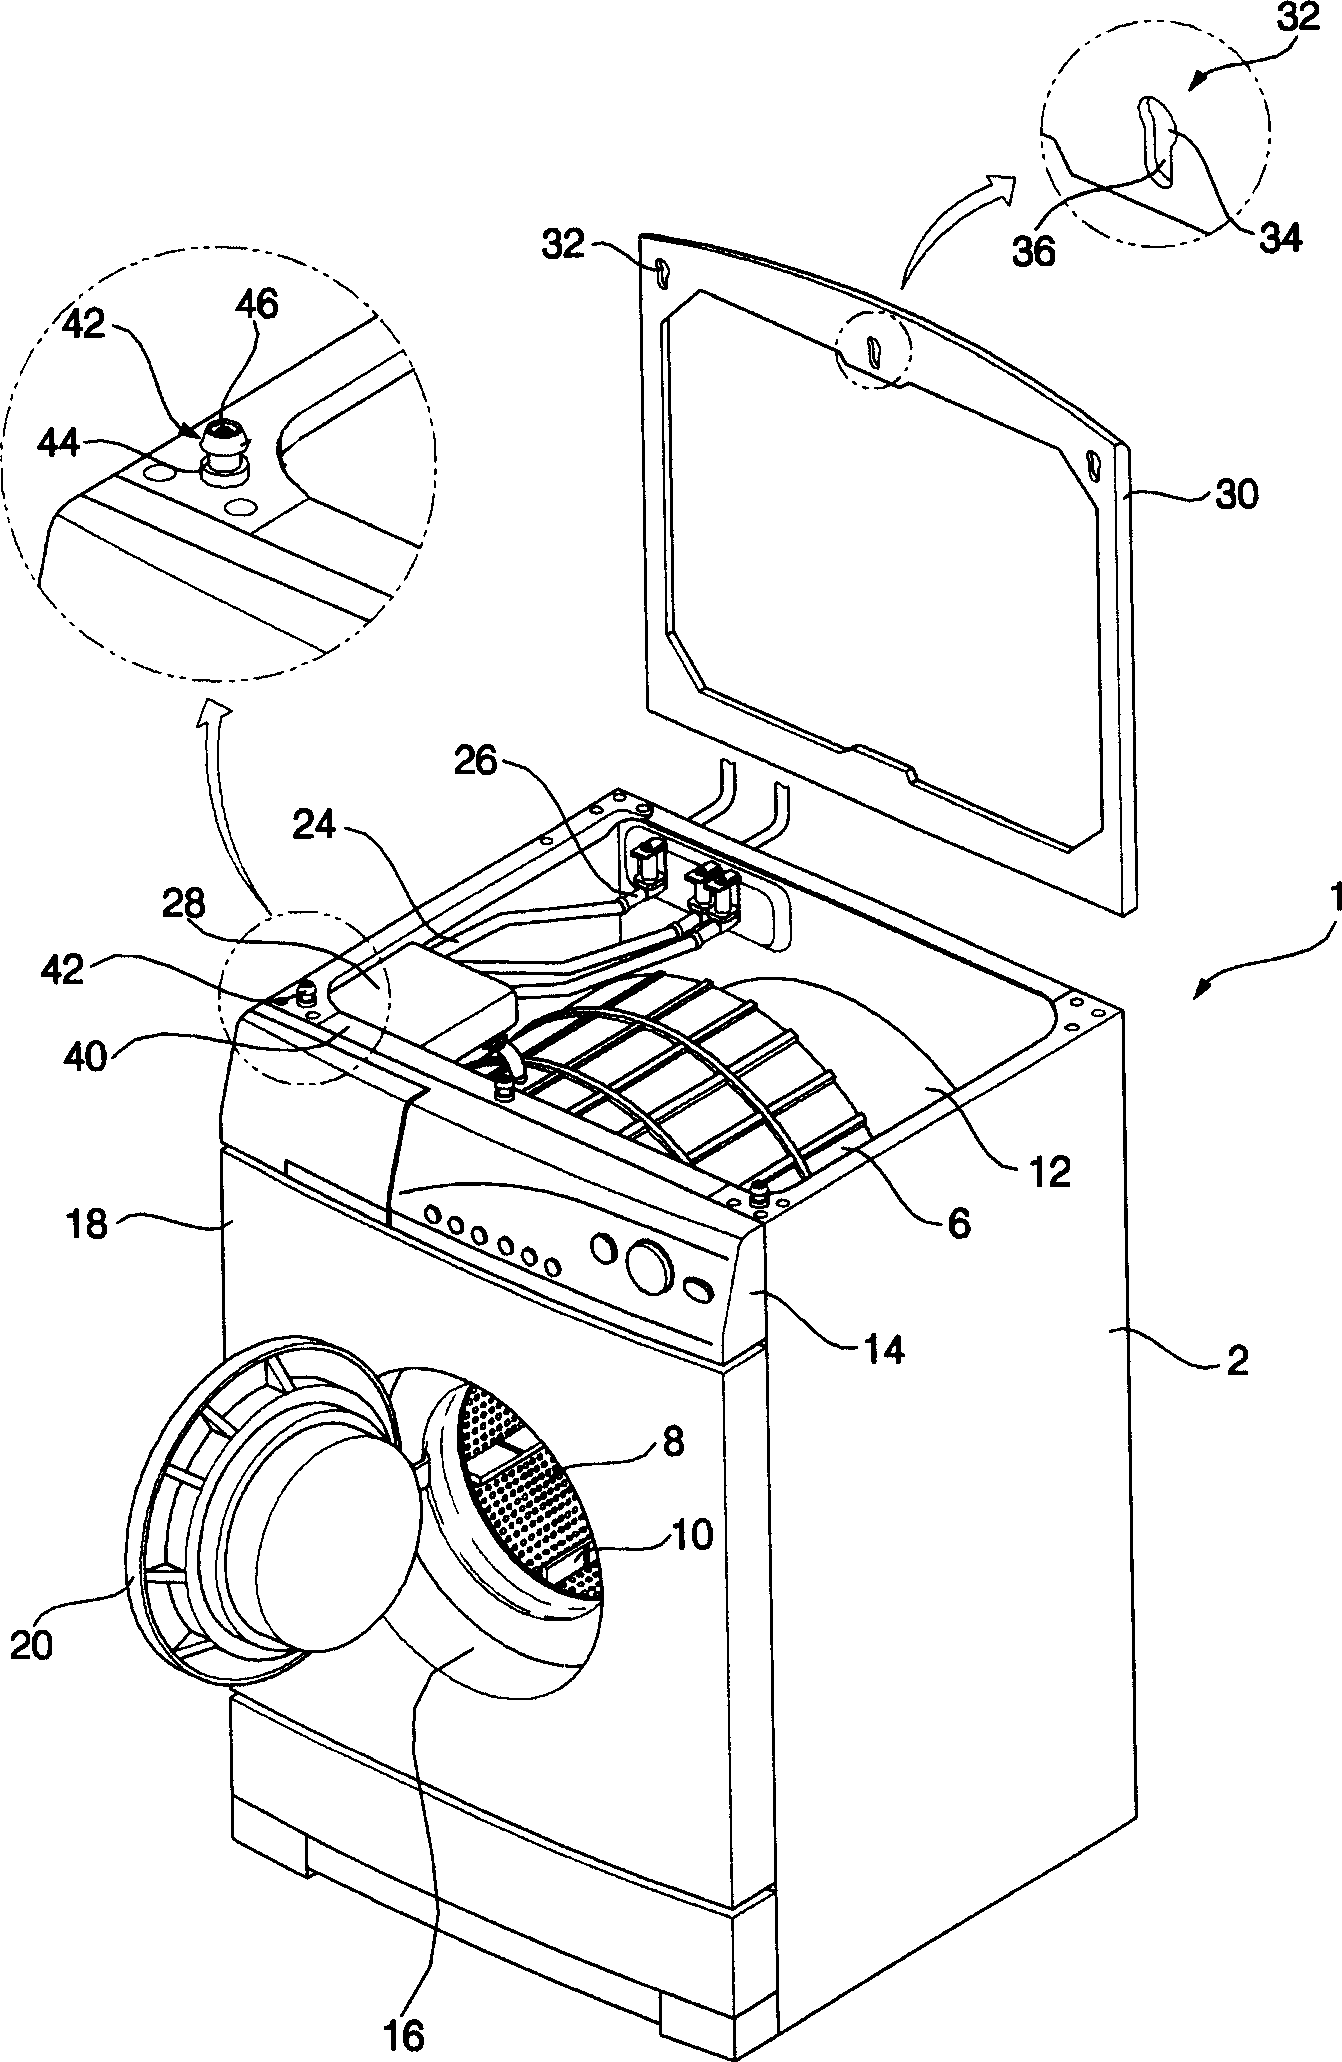 Top plate setting structure of drum washer